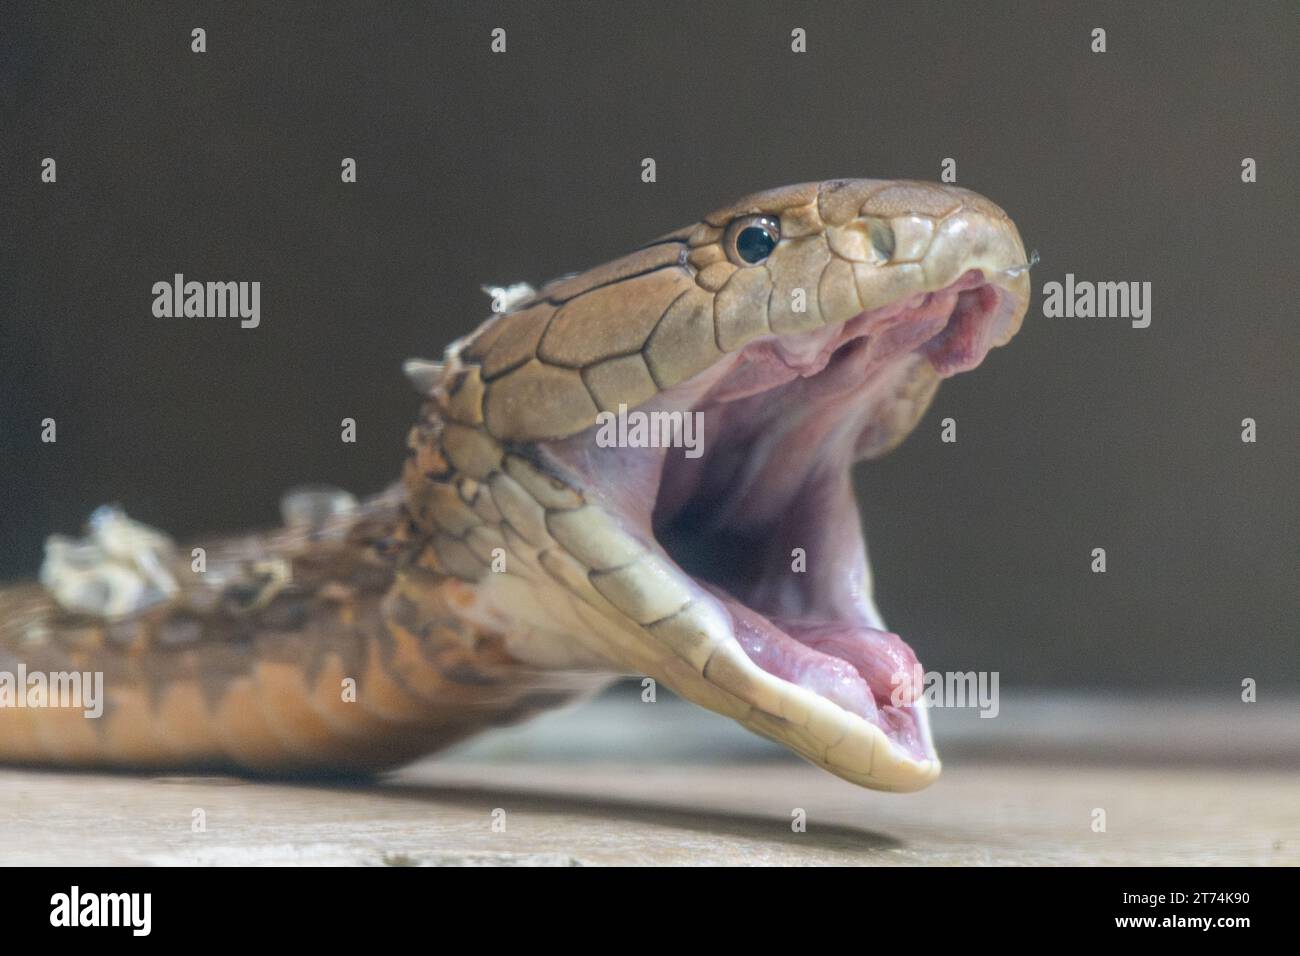 A King Cobra with open mouth adjusts its jaw after shedding its skin. A few flakes of shed skin still cling to the snake’s body. Stock Photo